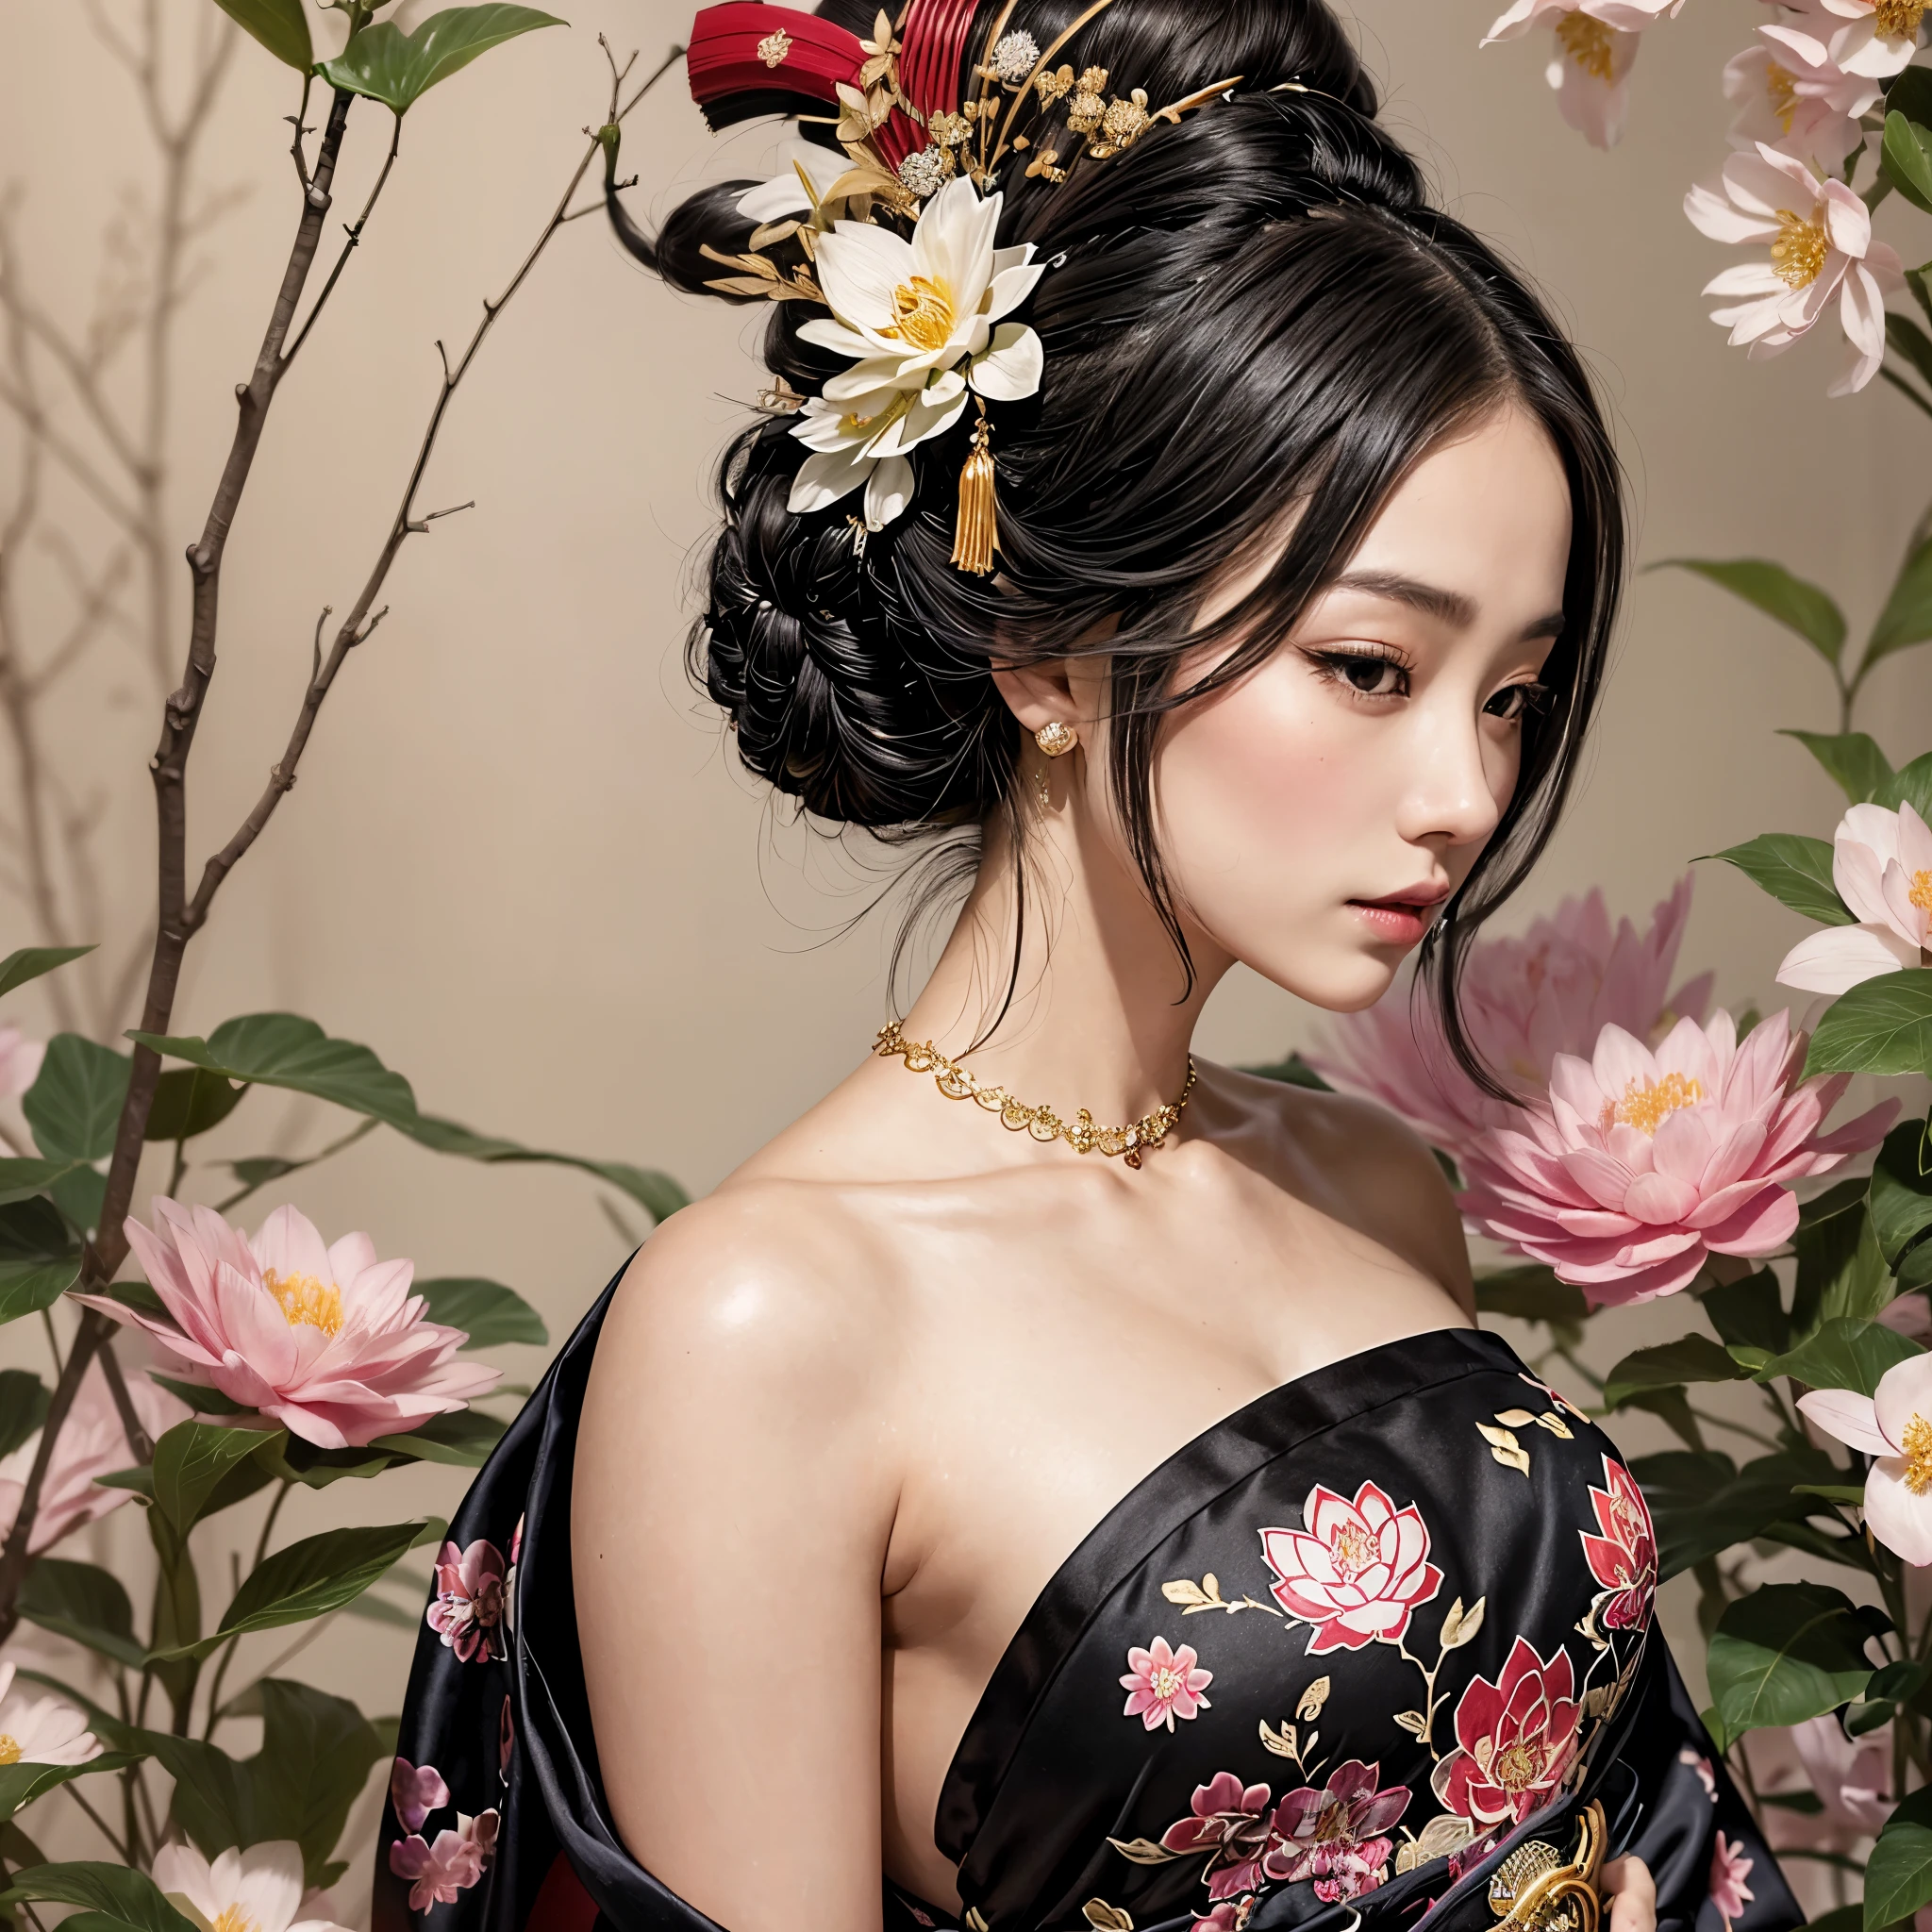 A beautiful Japanese geisha with black hair, beautiful lips, silky skin, beautiful eyes, slightly pink cheeks, with an ornament in her hair, wearing an earring, wearing a black kimono (clothing) open at the back and decorated with details of white lotus flowers, on her back, looking behind her shoulders in a sensual way, and in the background there is vegetation (plants), beautiful sensual glamorous hyperrealistic geisha, charming and attractive photorealistic geisha, an elegant geisha with intricate details.